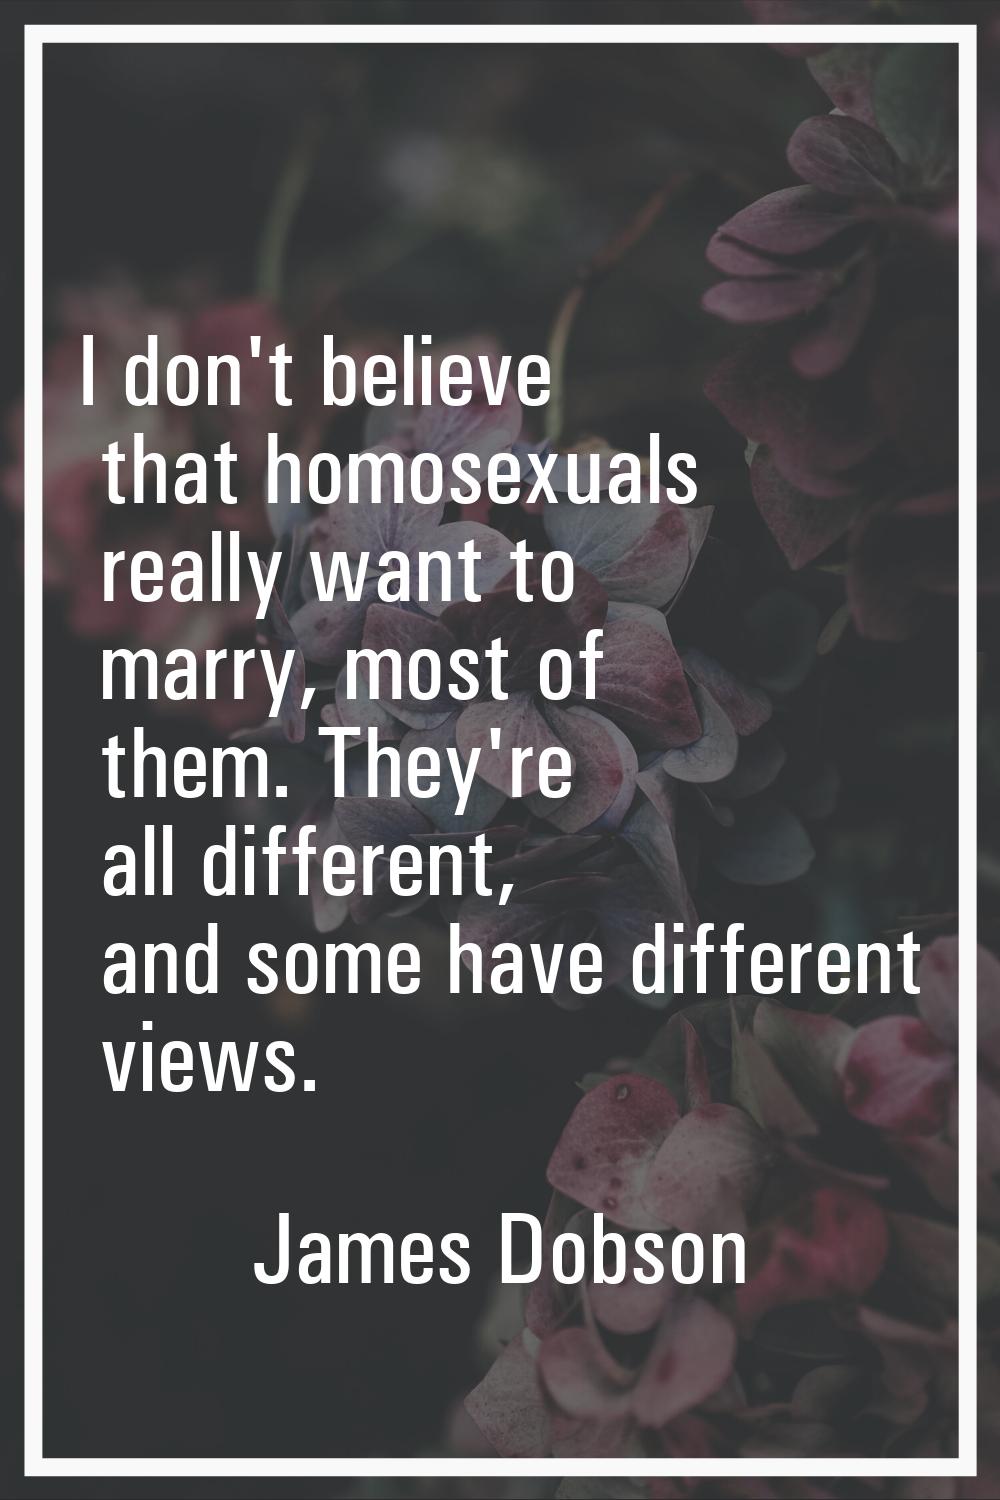 I don't believe that homosexuals really want to marry, most of them. They're all different, and som